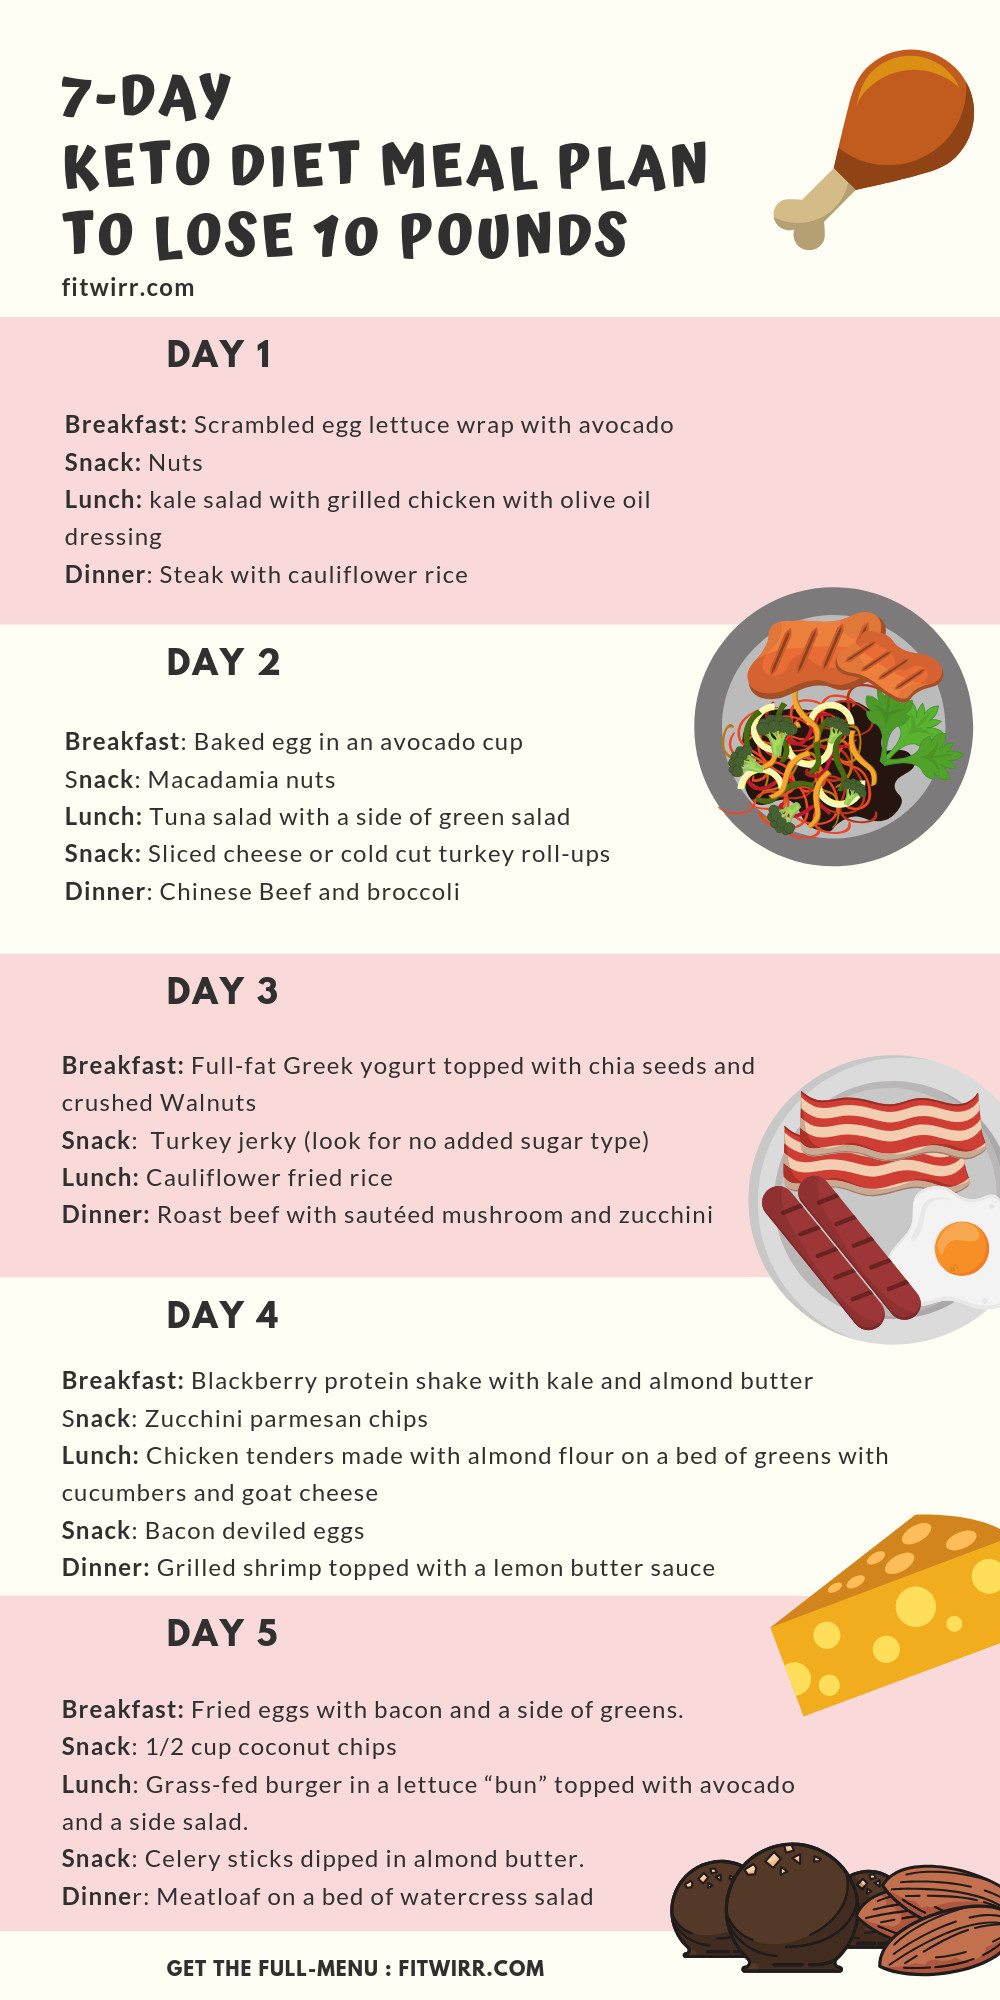 Keto Diet For Beginners Meal Plan Easy With Grocery List
 Keto Diet Menu 7 Day Keto Meal Plan for Beginners to Lose